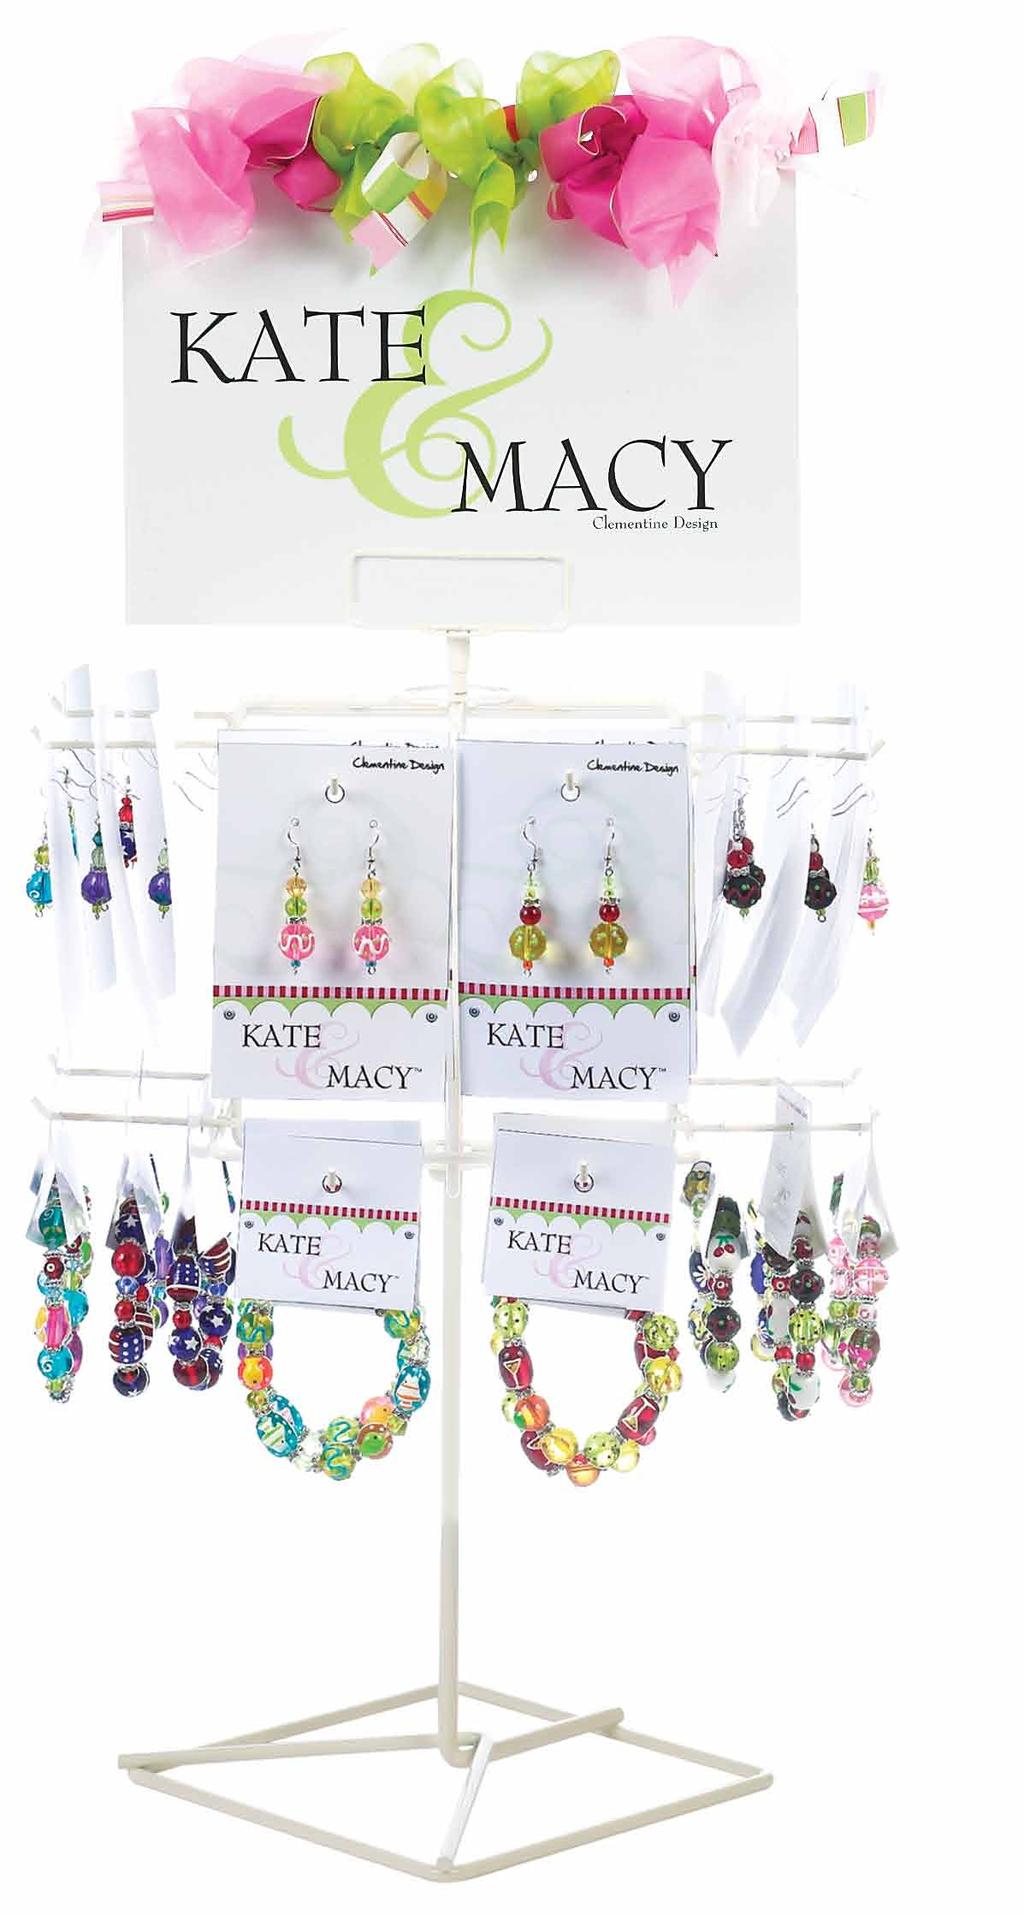 KATE & MACY JEWELRY 48-PC. DISPLAY 8 bracelet styles and 8 earring styles with free display. Assortment preselected for display.